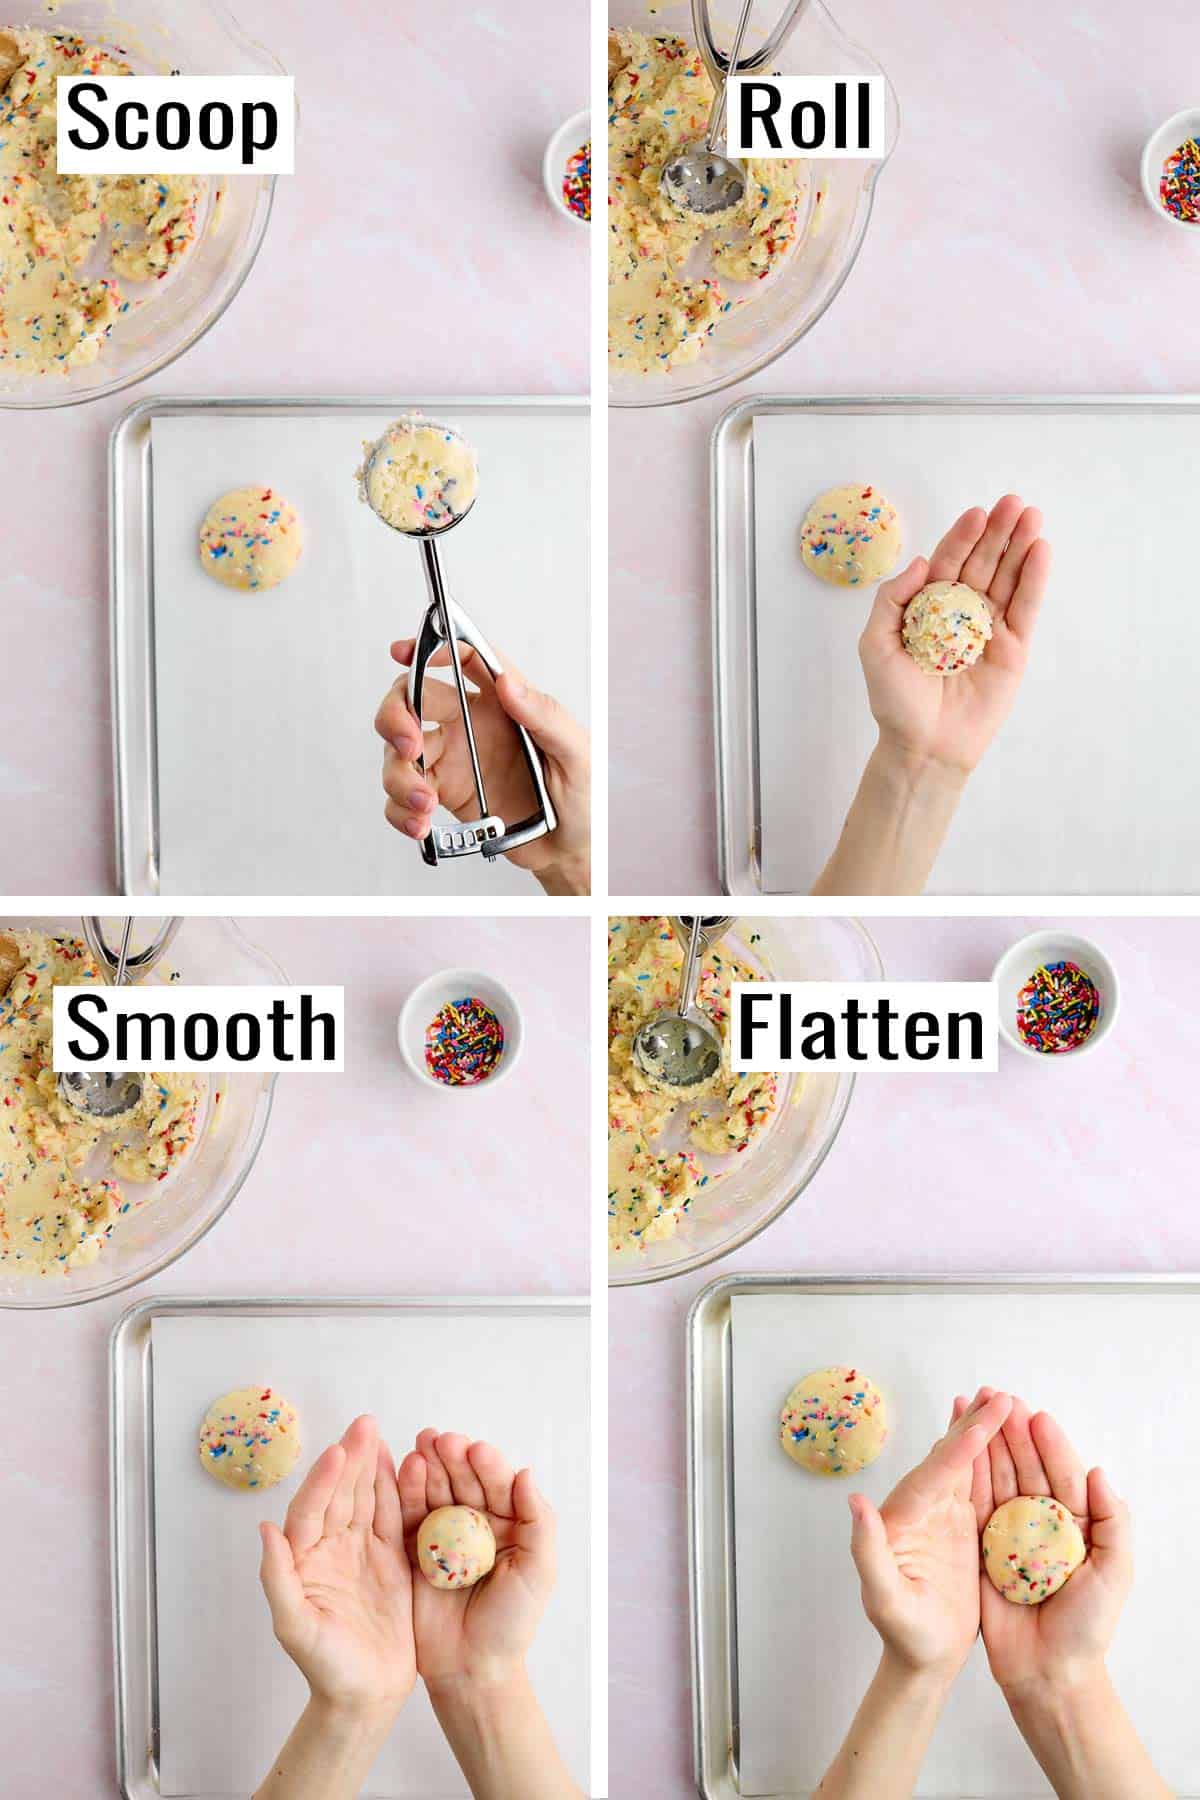 Step-by-step photos showing scooping the cookie dough, rolling it into a smooth ball, and then flattening it before putting it on the cookie sheet.